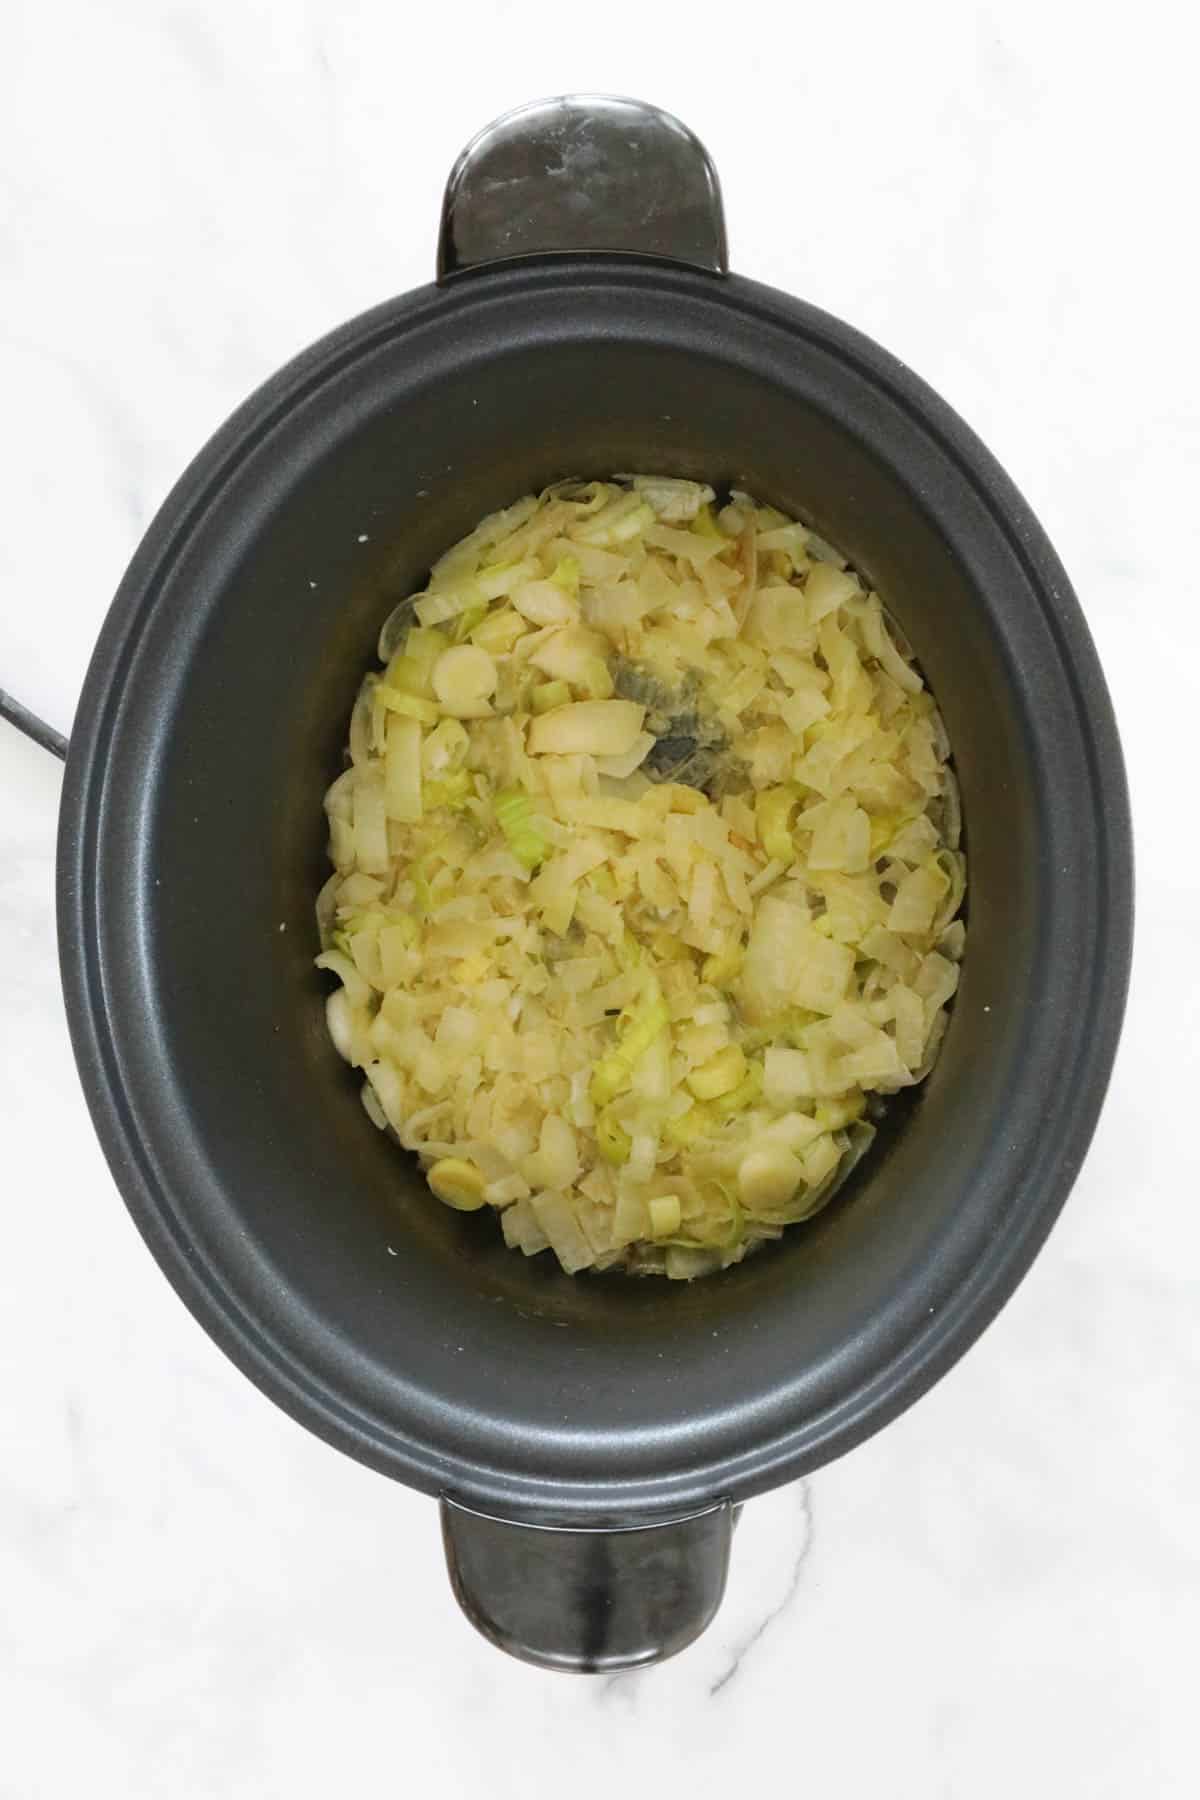 Sauteed sliced leek, onion and garlic placed into a slow cooker bowl.